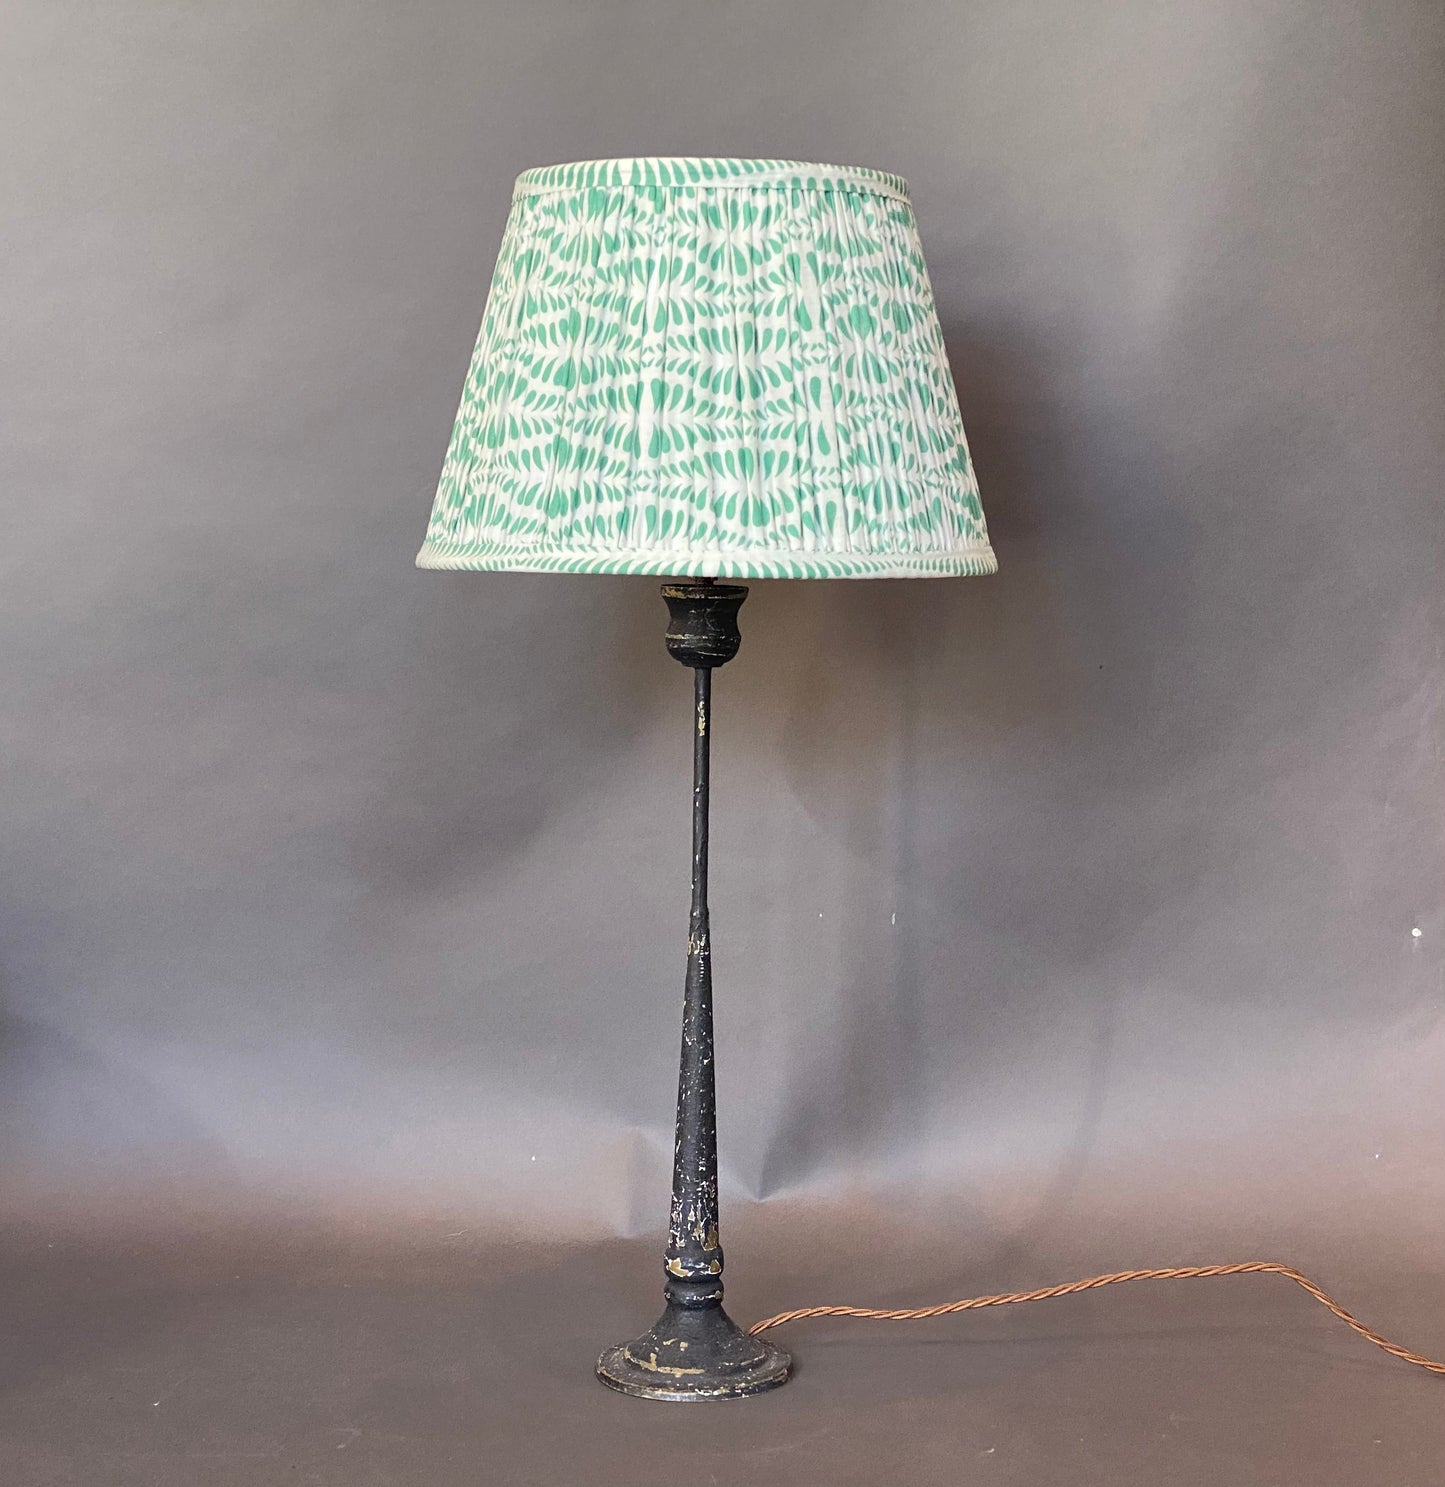 Green Bangla Cotton Lampshade shown on a rustic candlestick lamp base on a grey background